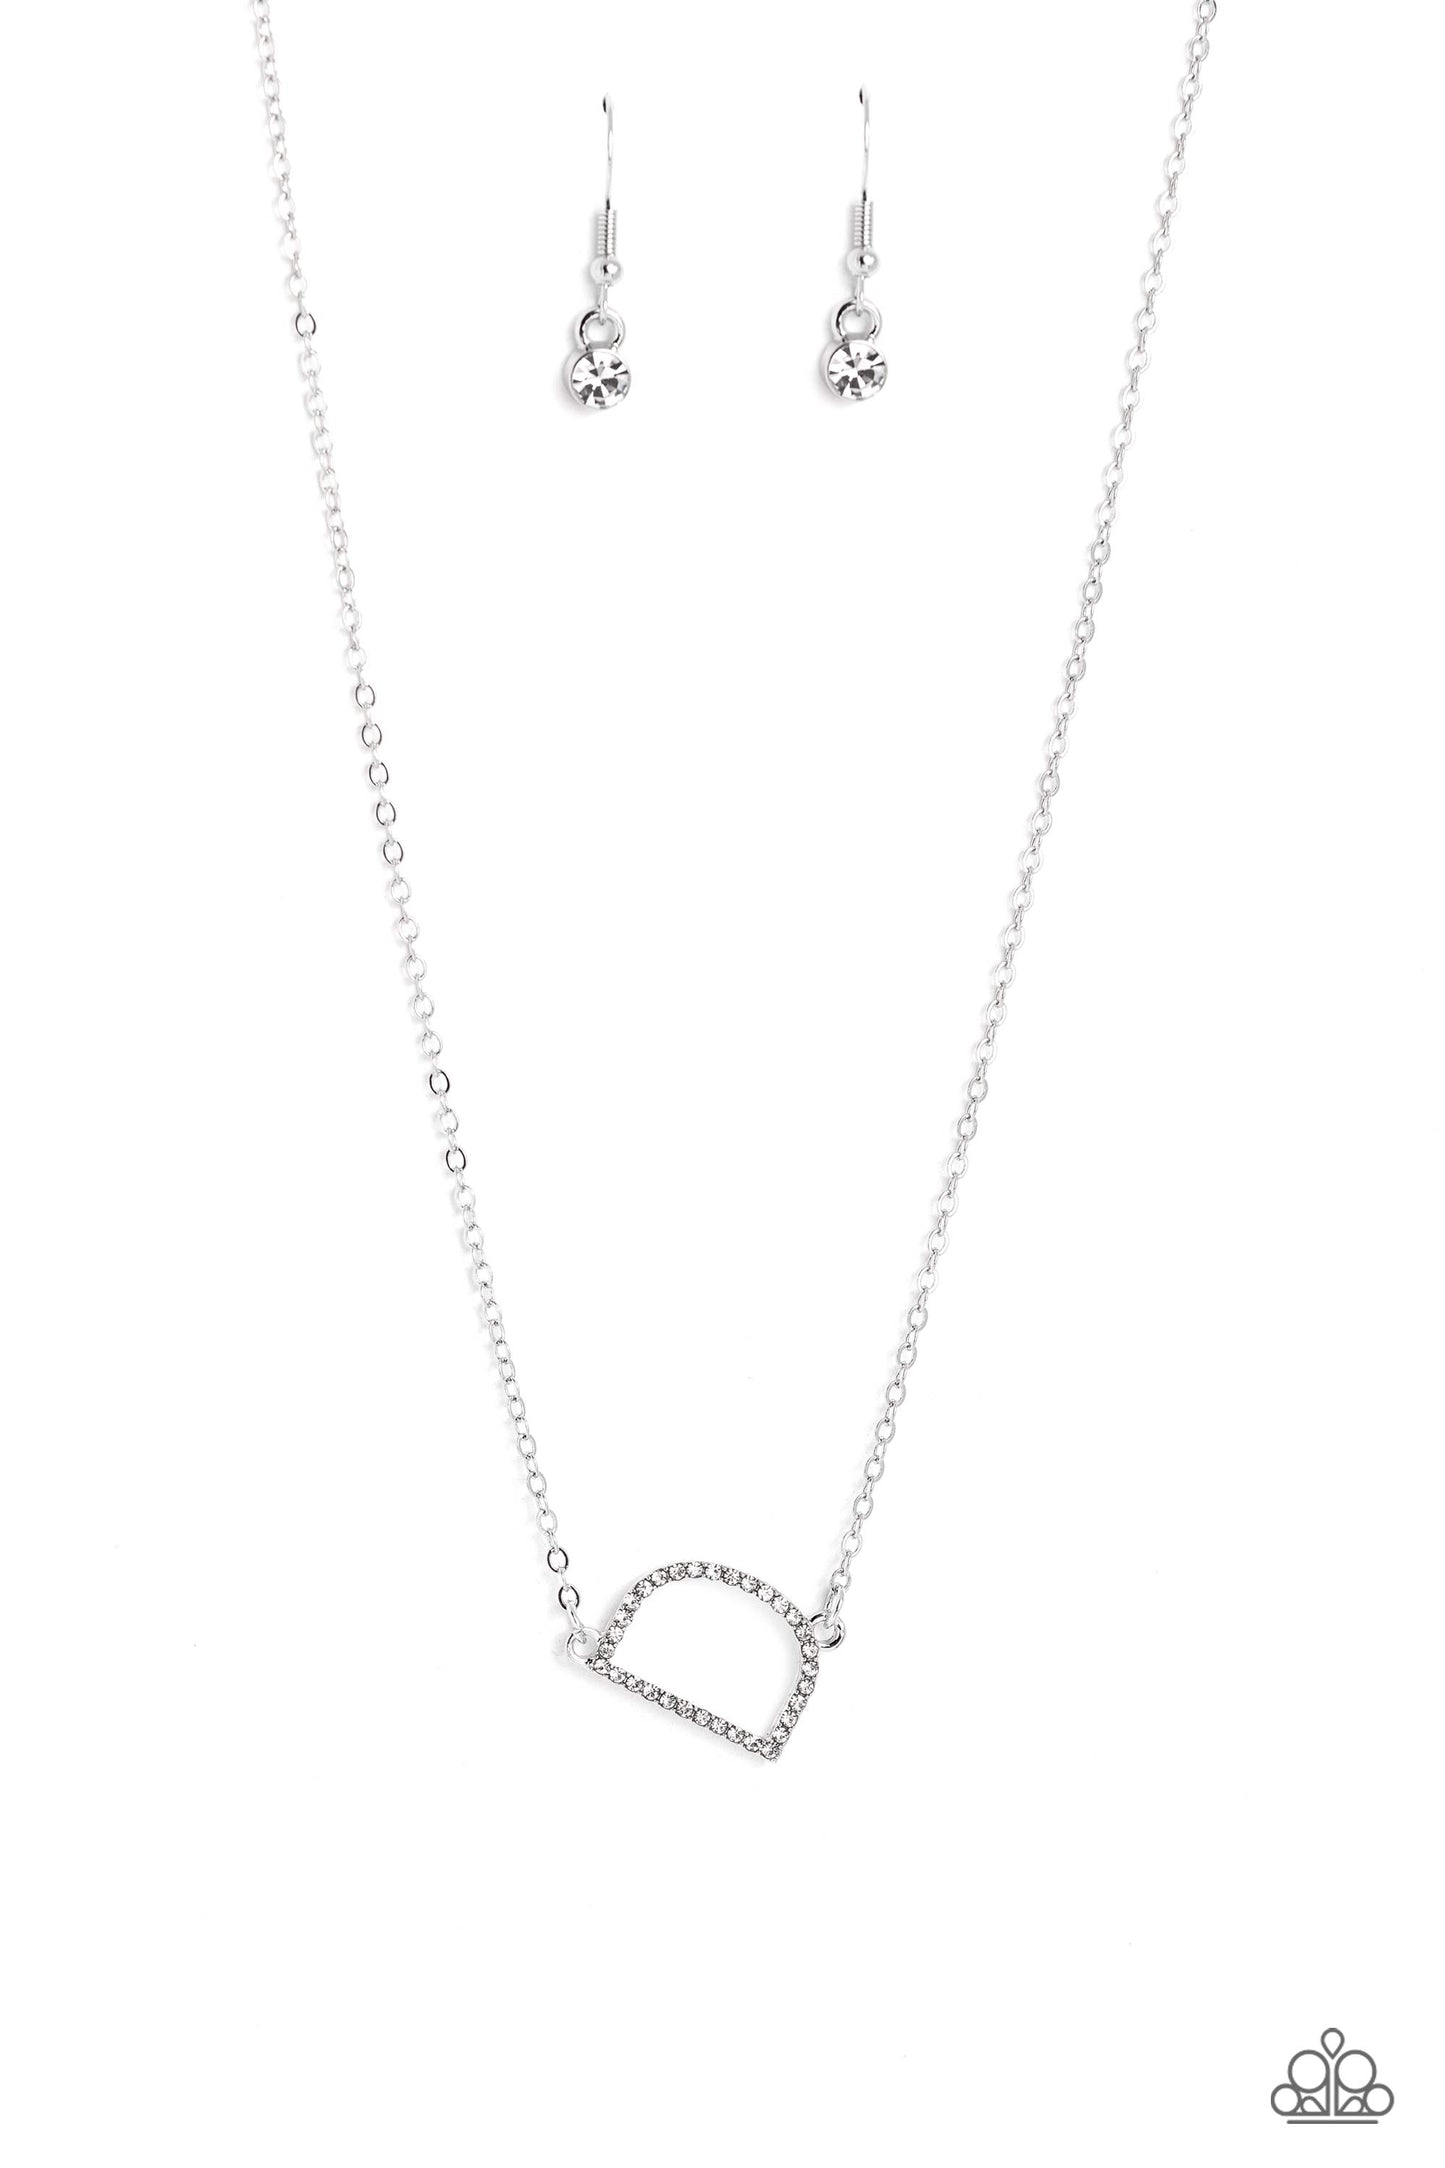 INITIALLY Yours - "D" White Rhinestone Pendant Paparazzi Necklace & matching earrings